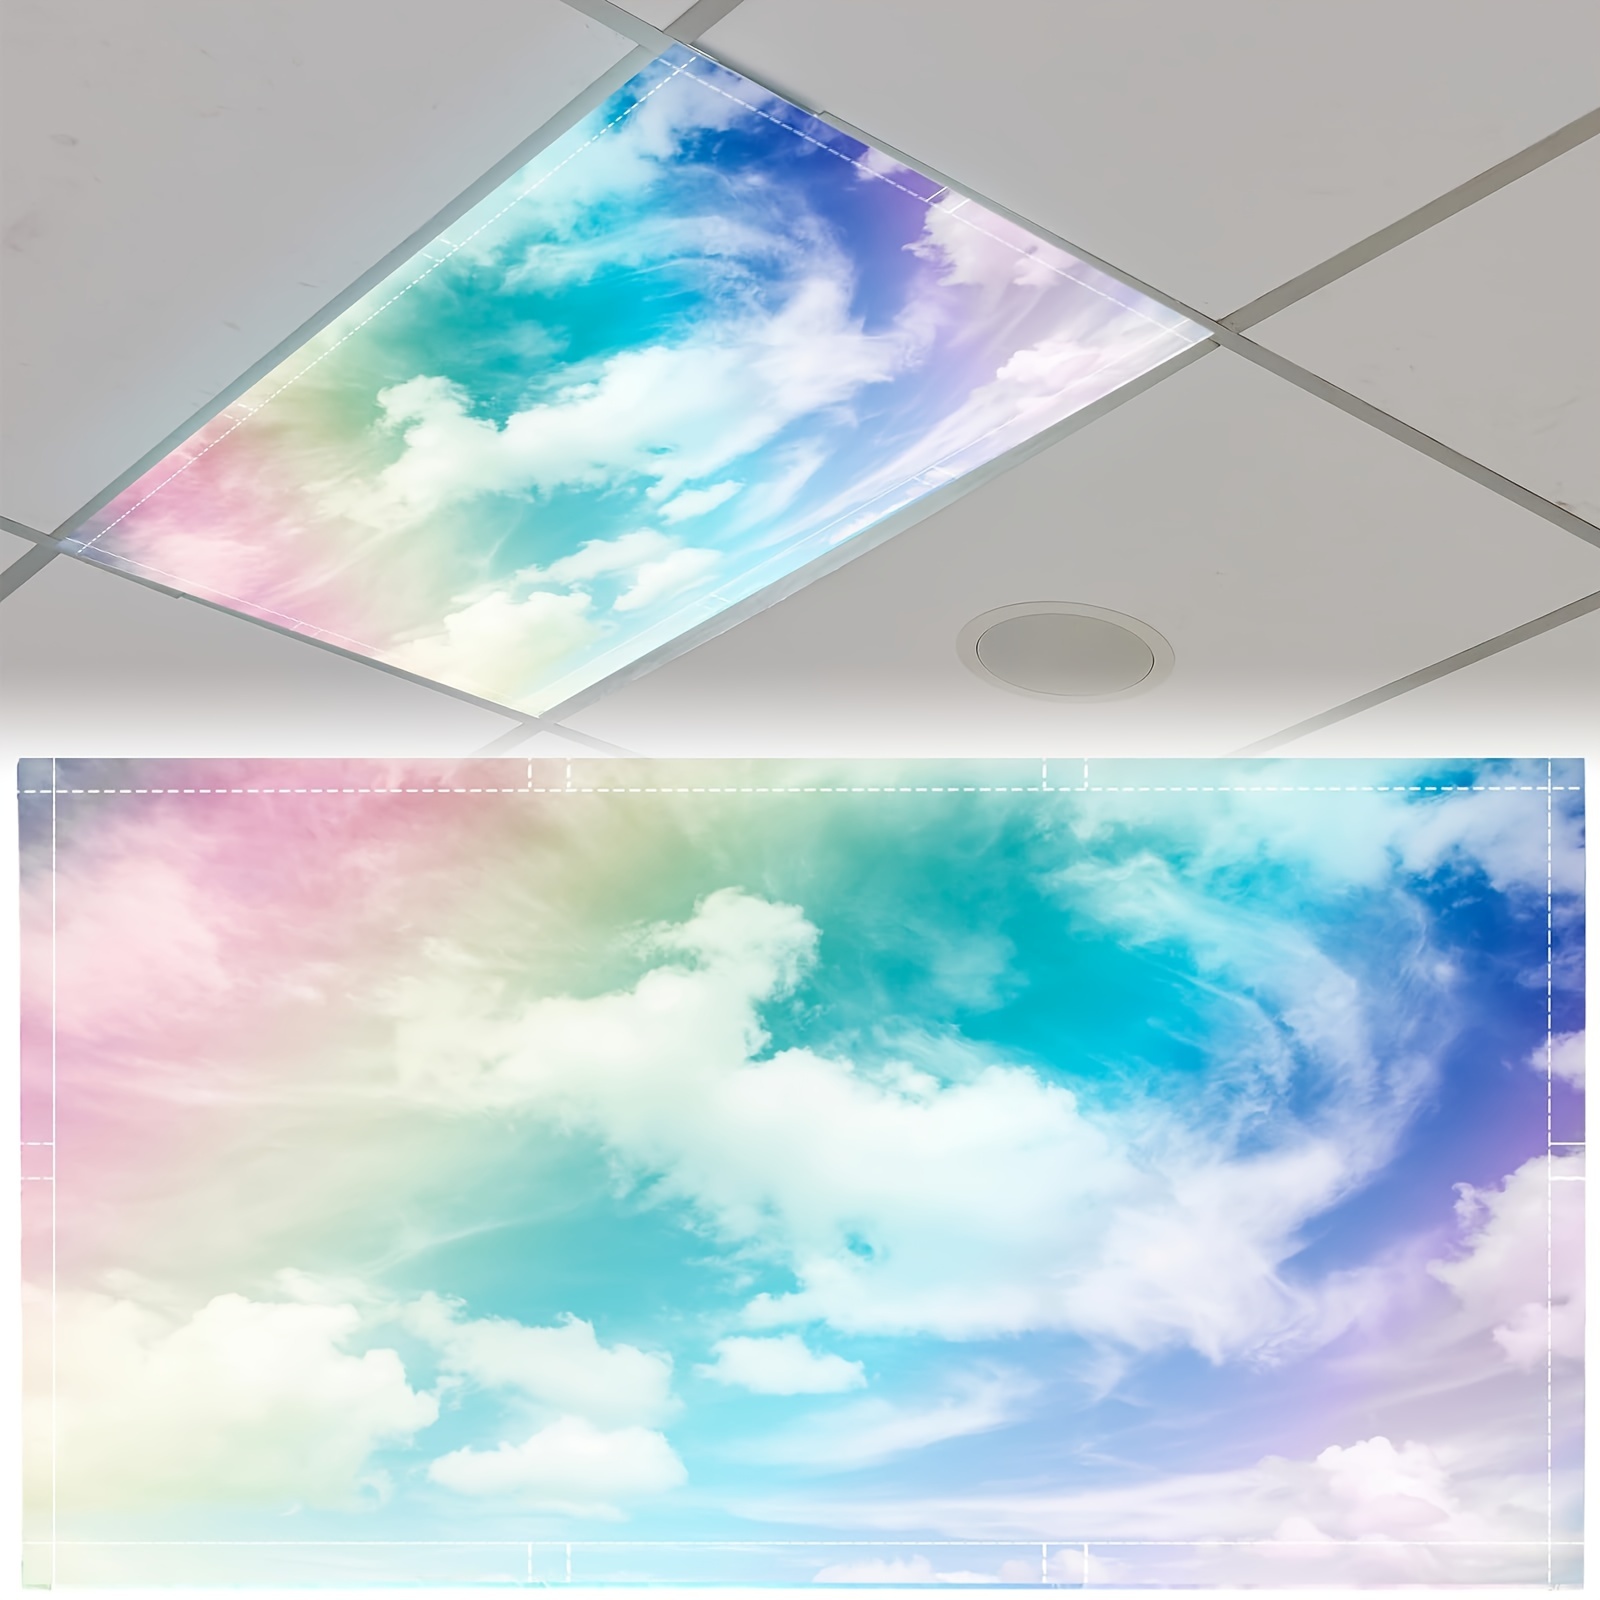 

Magnetic Fluorescent Light Panel - Colorful Auspicious Clouds Design, 24x48" Ceiling Lamp Shade For Home, Office, Classroom - Easy Install, No Wiring Needed